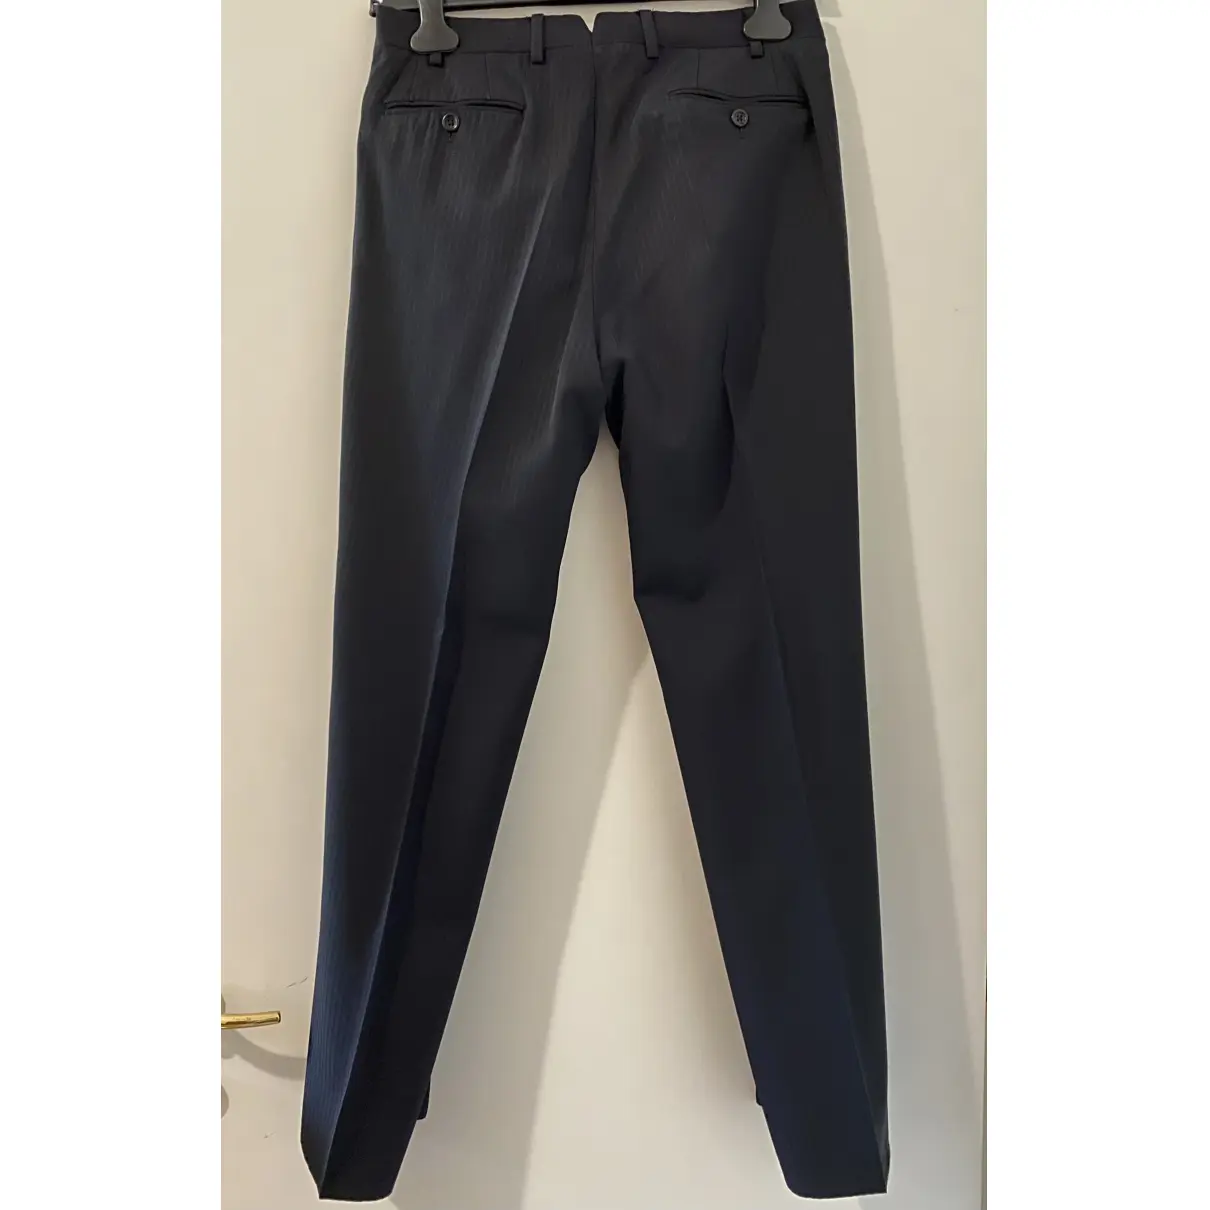 Buy Armani Collezioni Wool trousers online